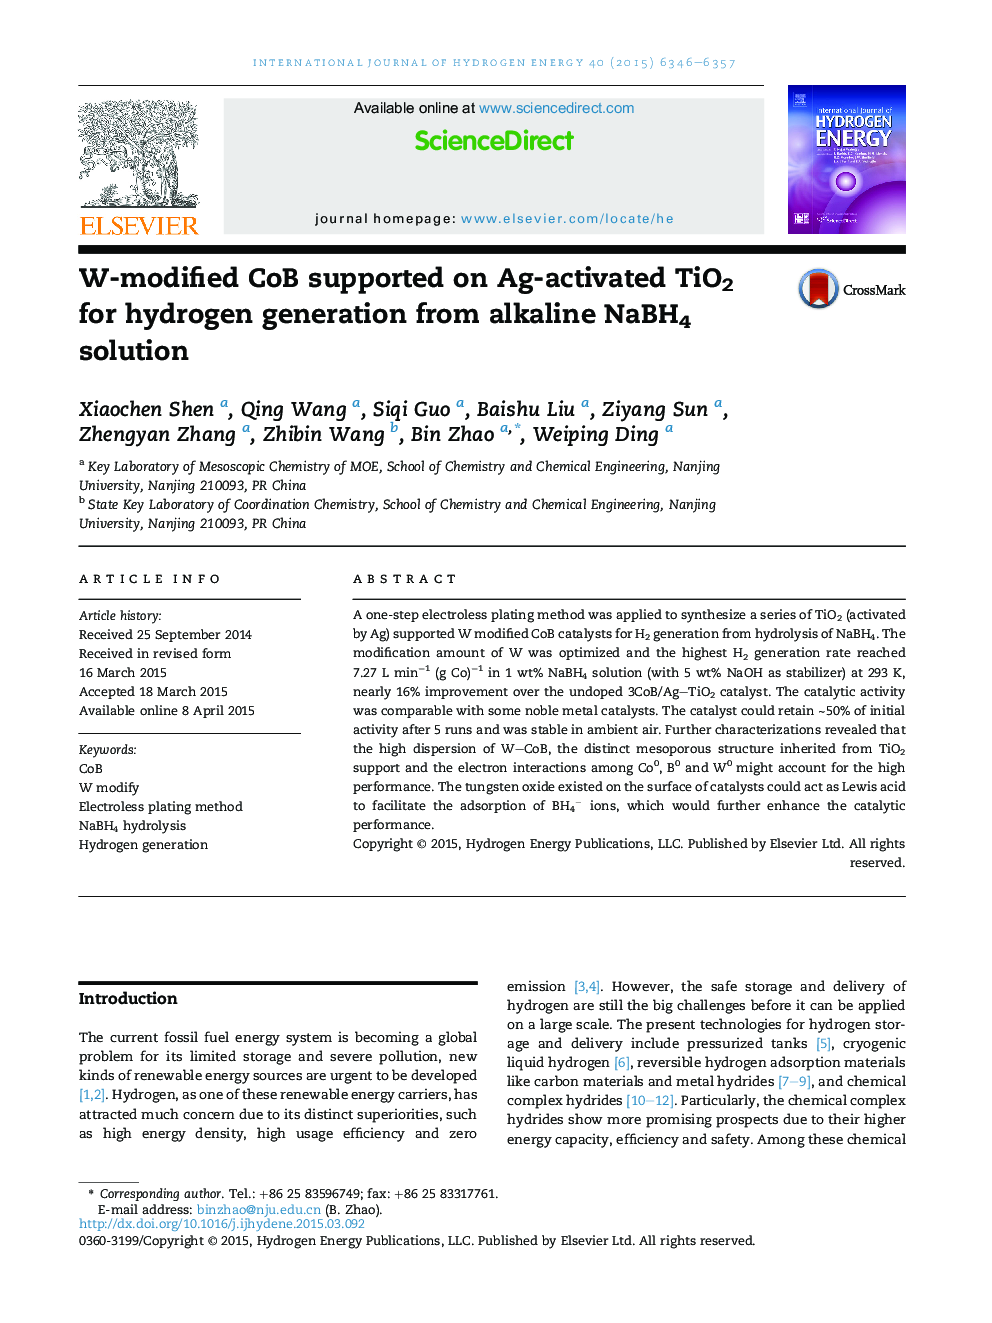 W-modified CoB supported on Ag-activated TiO2 for hydrogen generation from alkaline NaBH4 solution